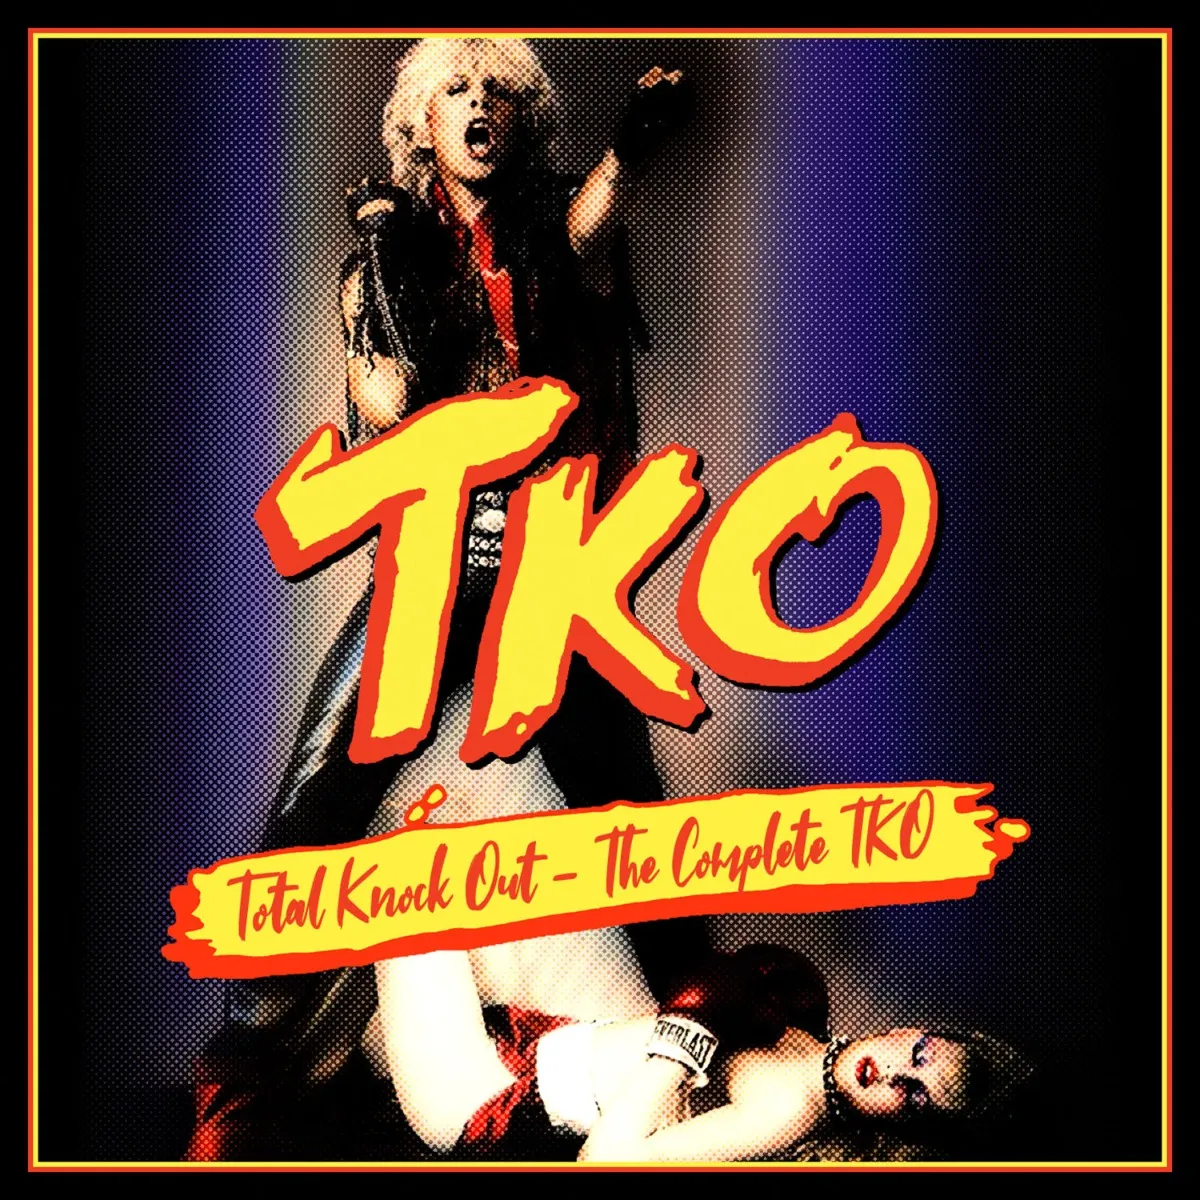 TKO (from US) / TOTAL KNOCK OUT - THE COMPLETE TKO 5CD CLAMSHELL BOX